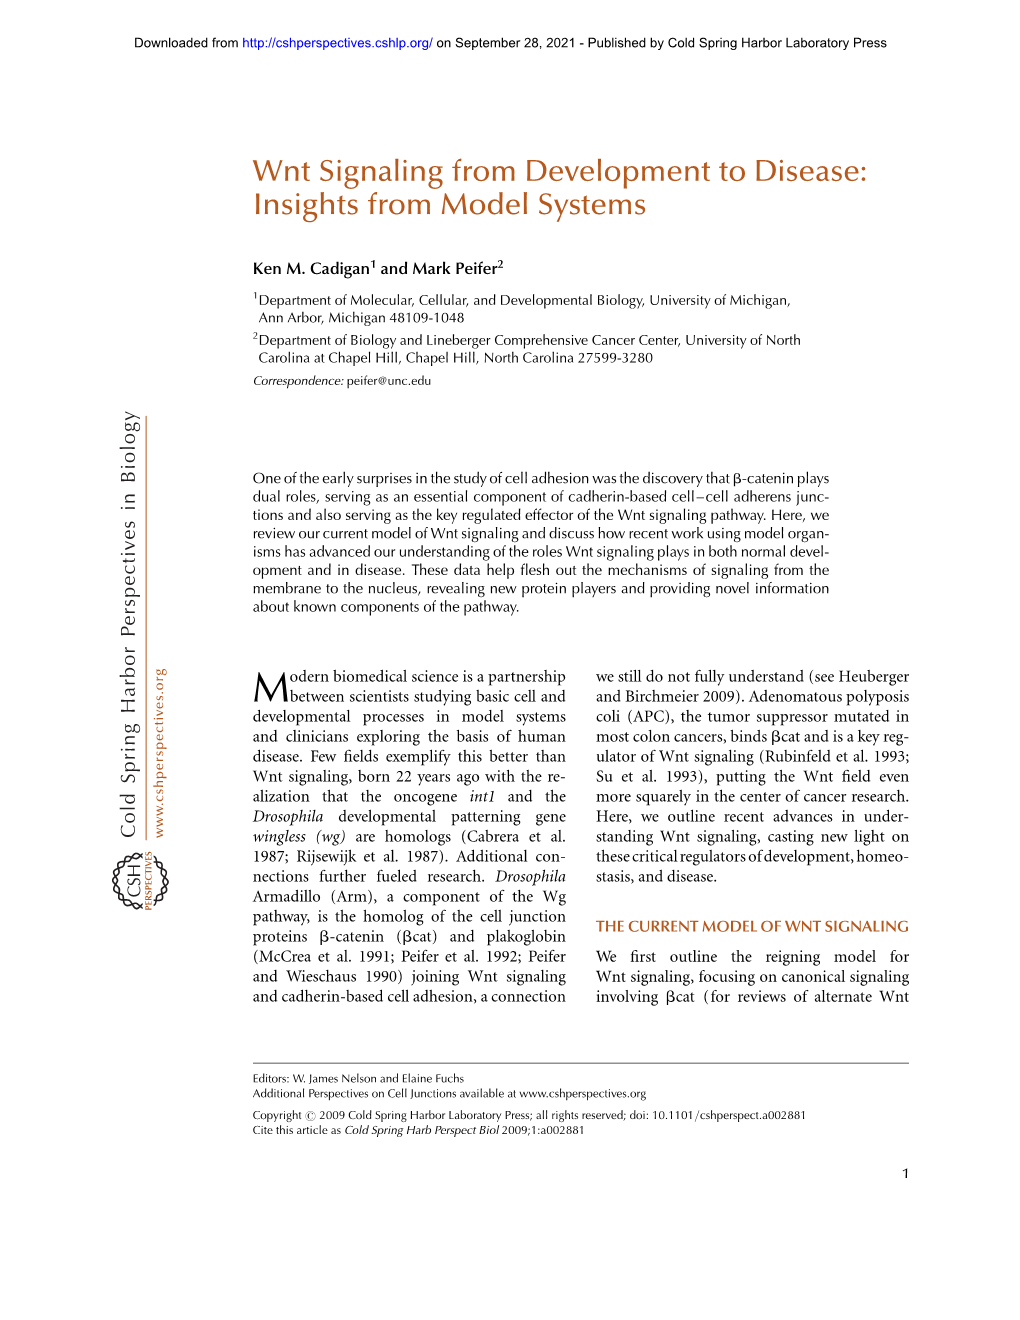 Wnt Signaling from Development to Disease: Insights from Model Systems